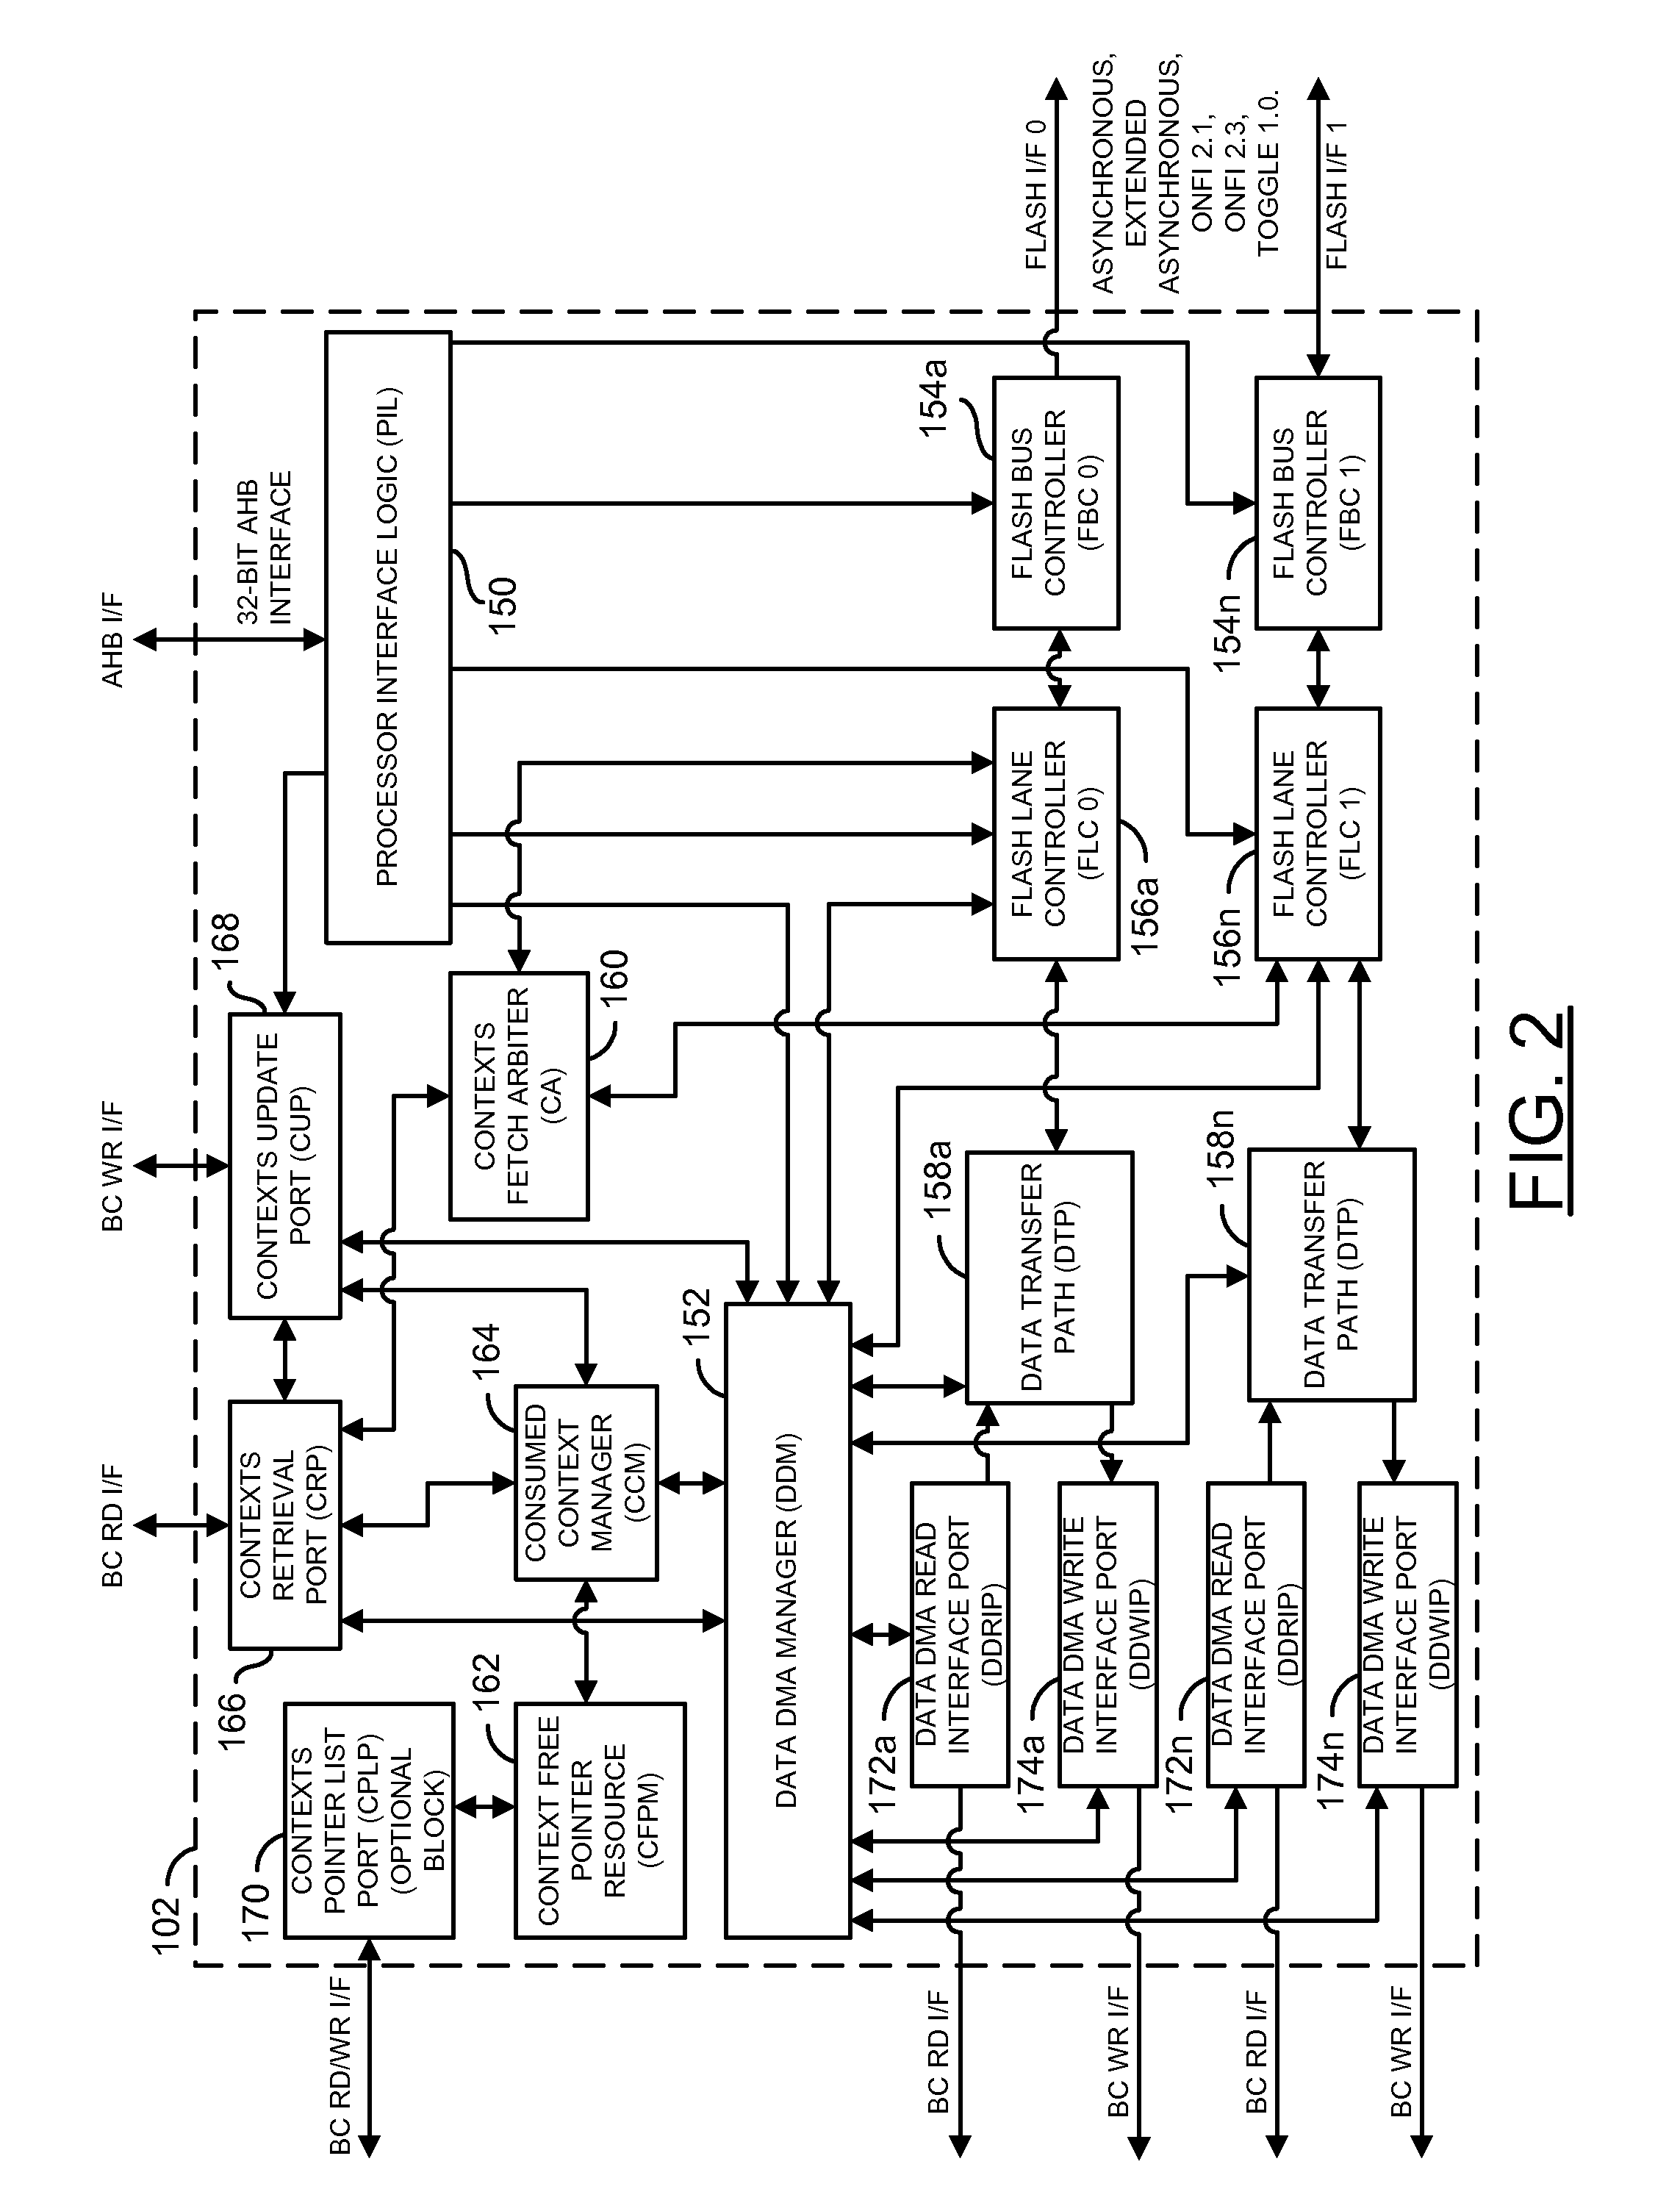 Flash controller hardware architecture for flash devices